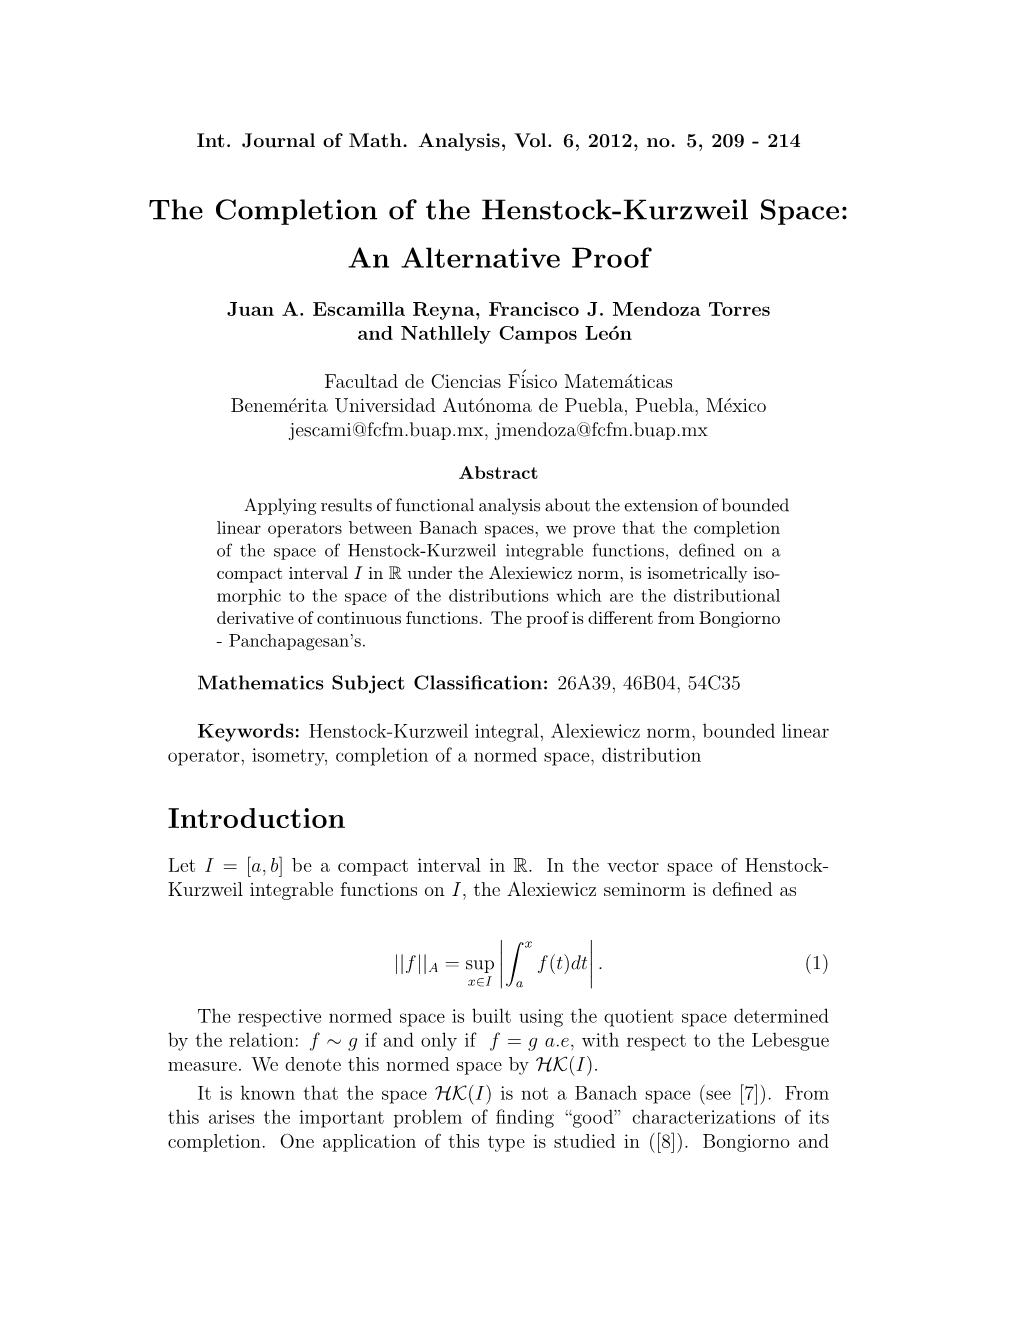 The Completion of the Henstock-Kurzweil Space: an Alternative Proof